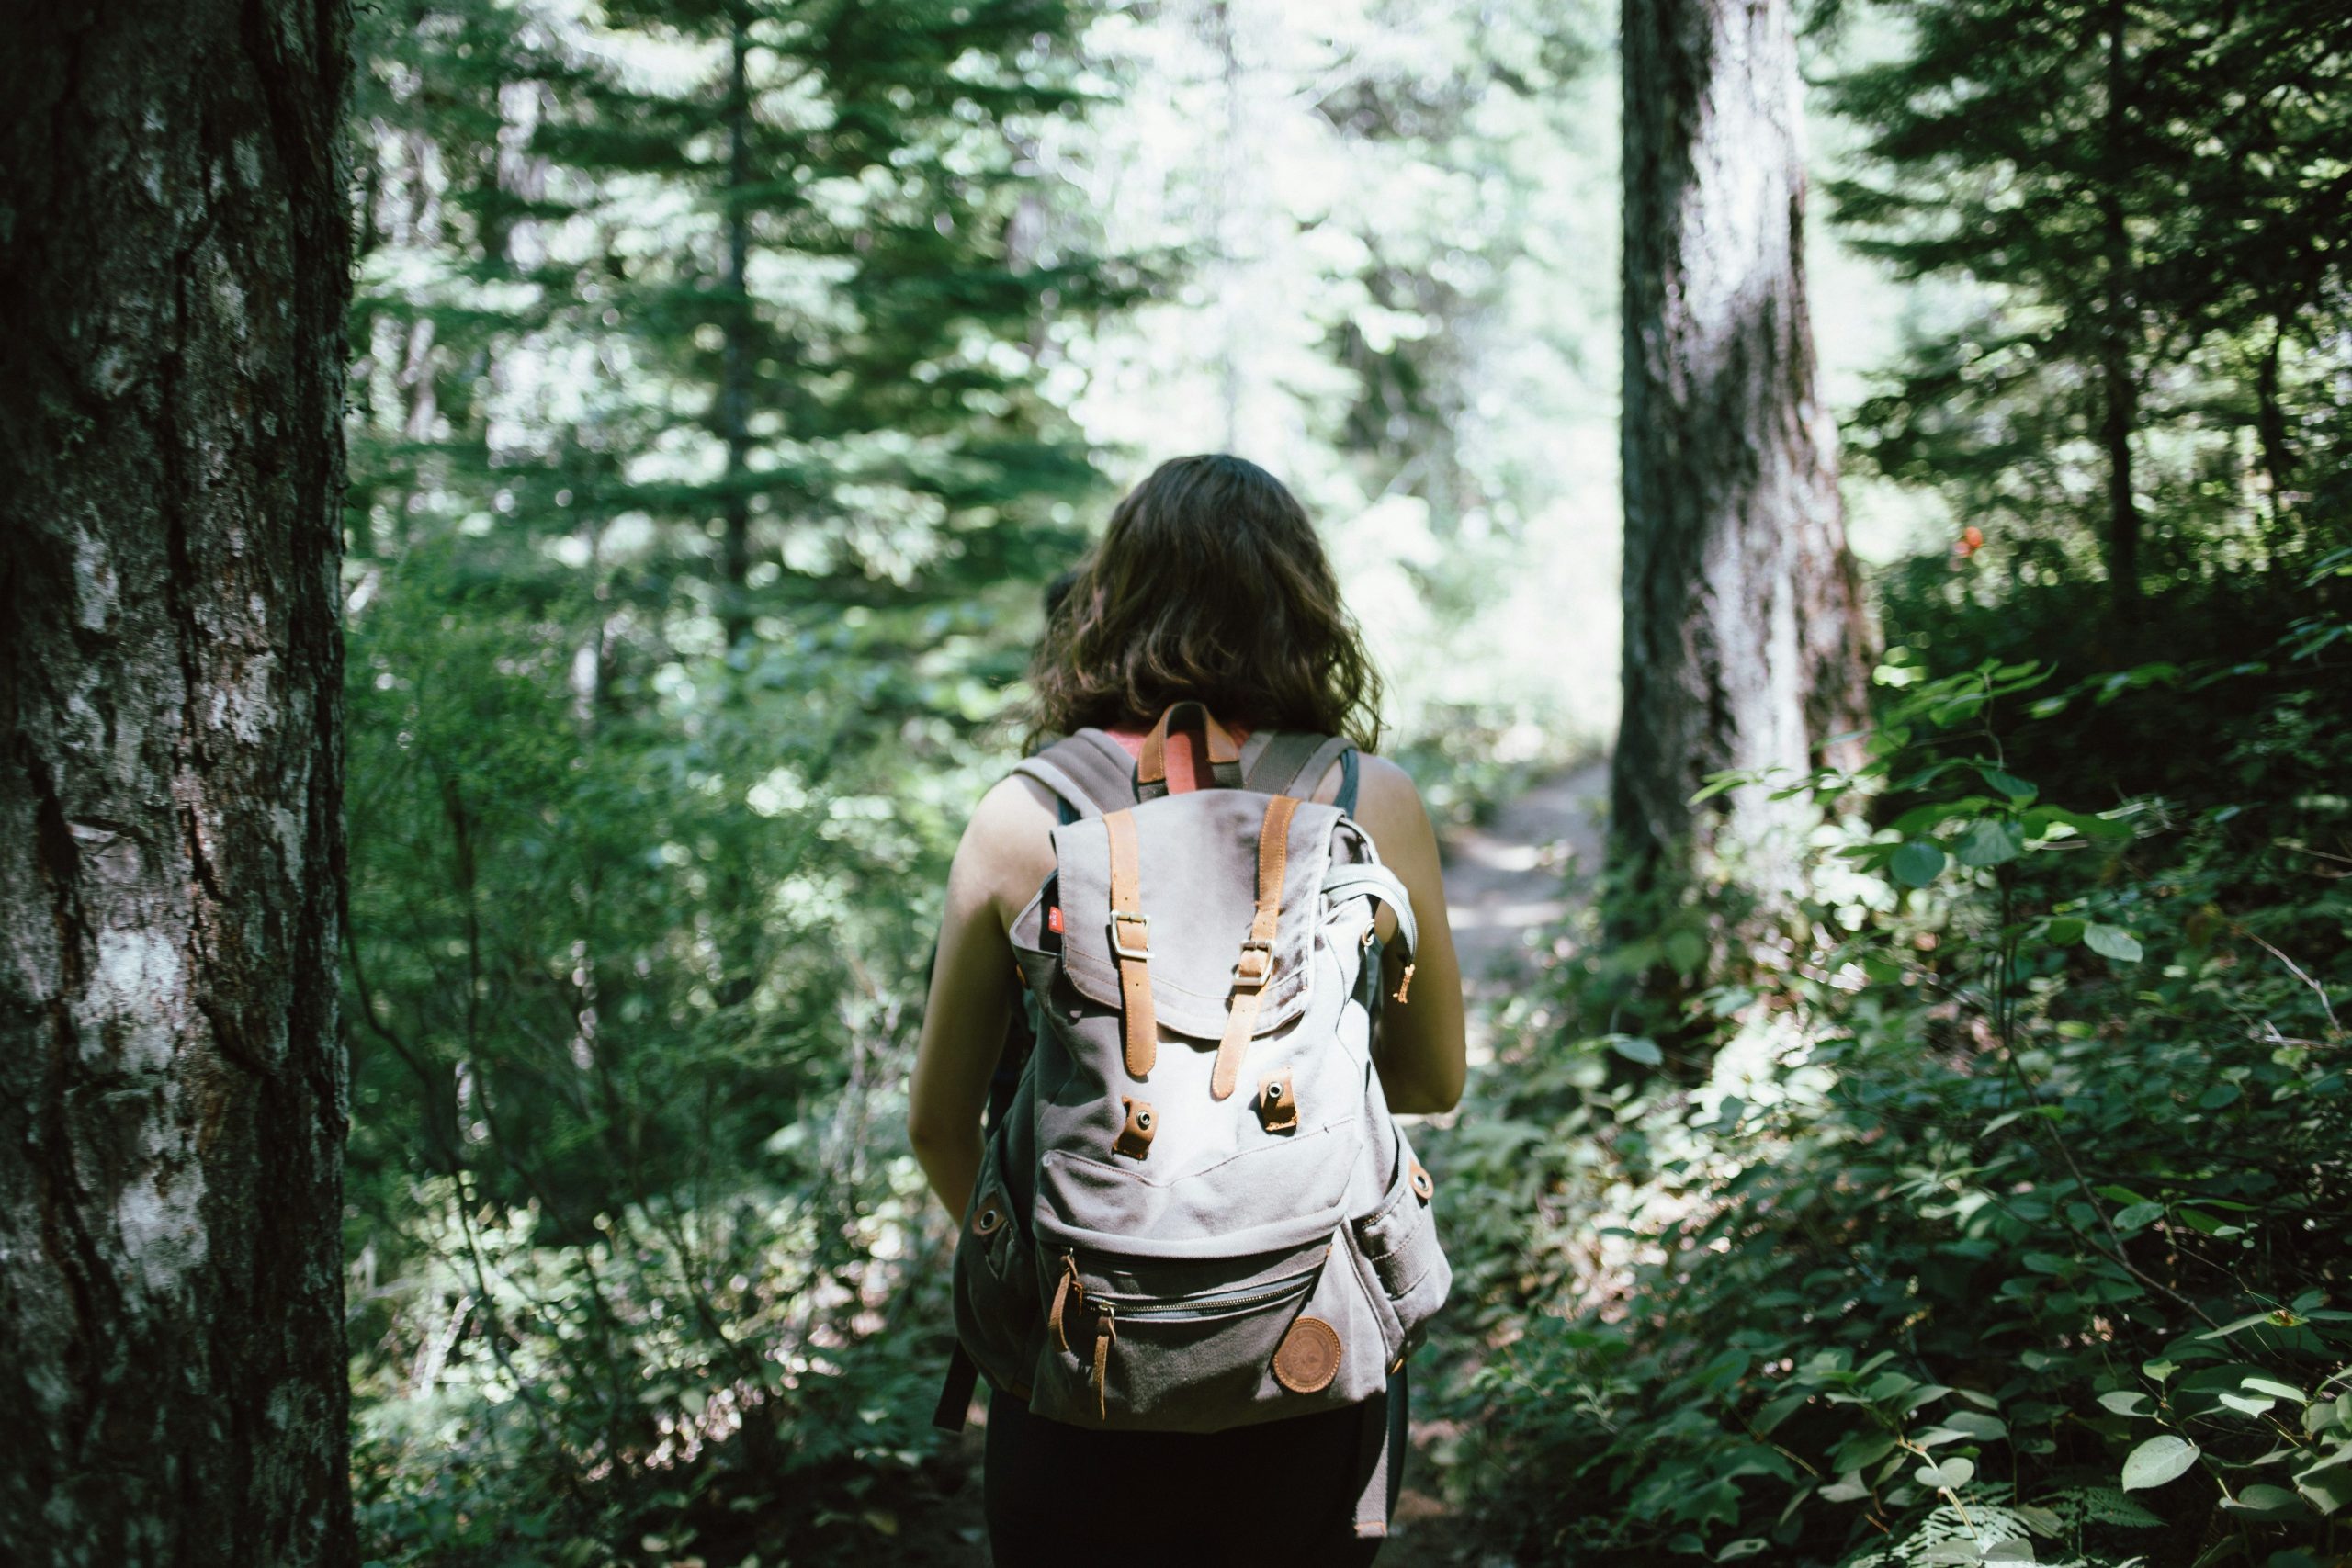 Woman with a backpack is exploring nature and looking at trees.